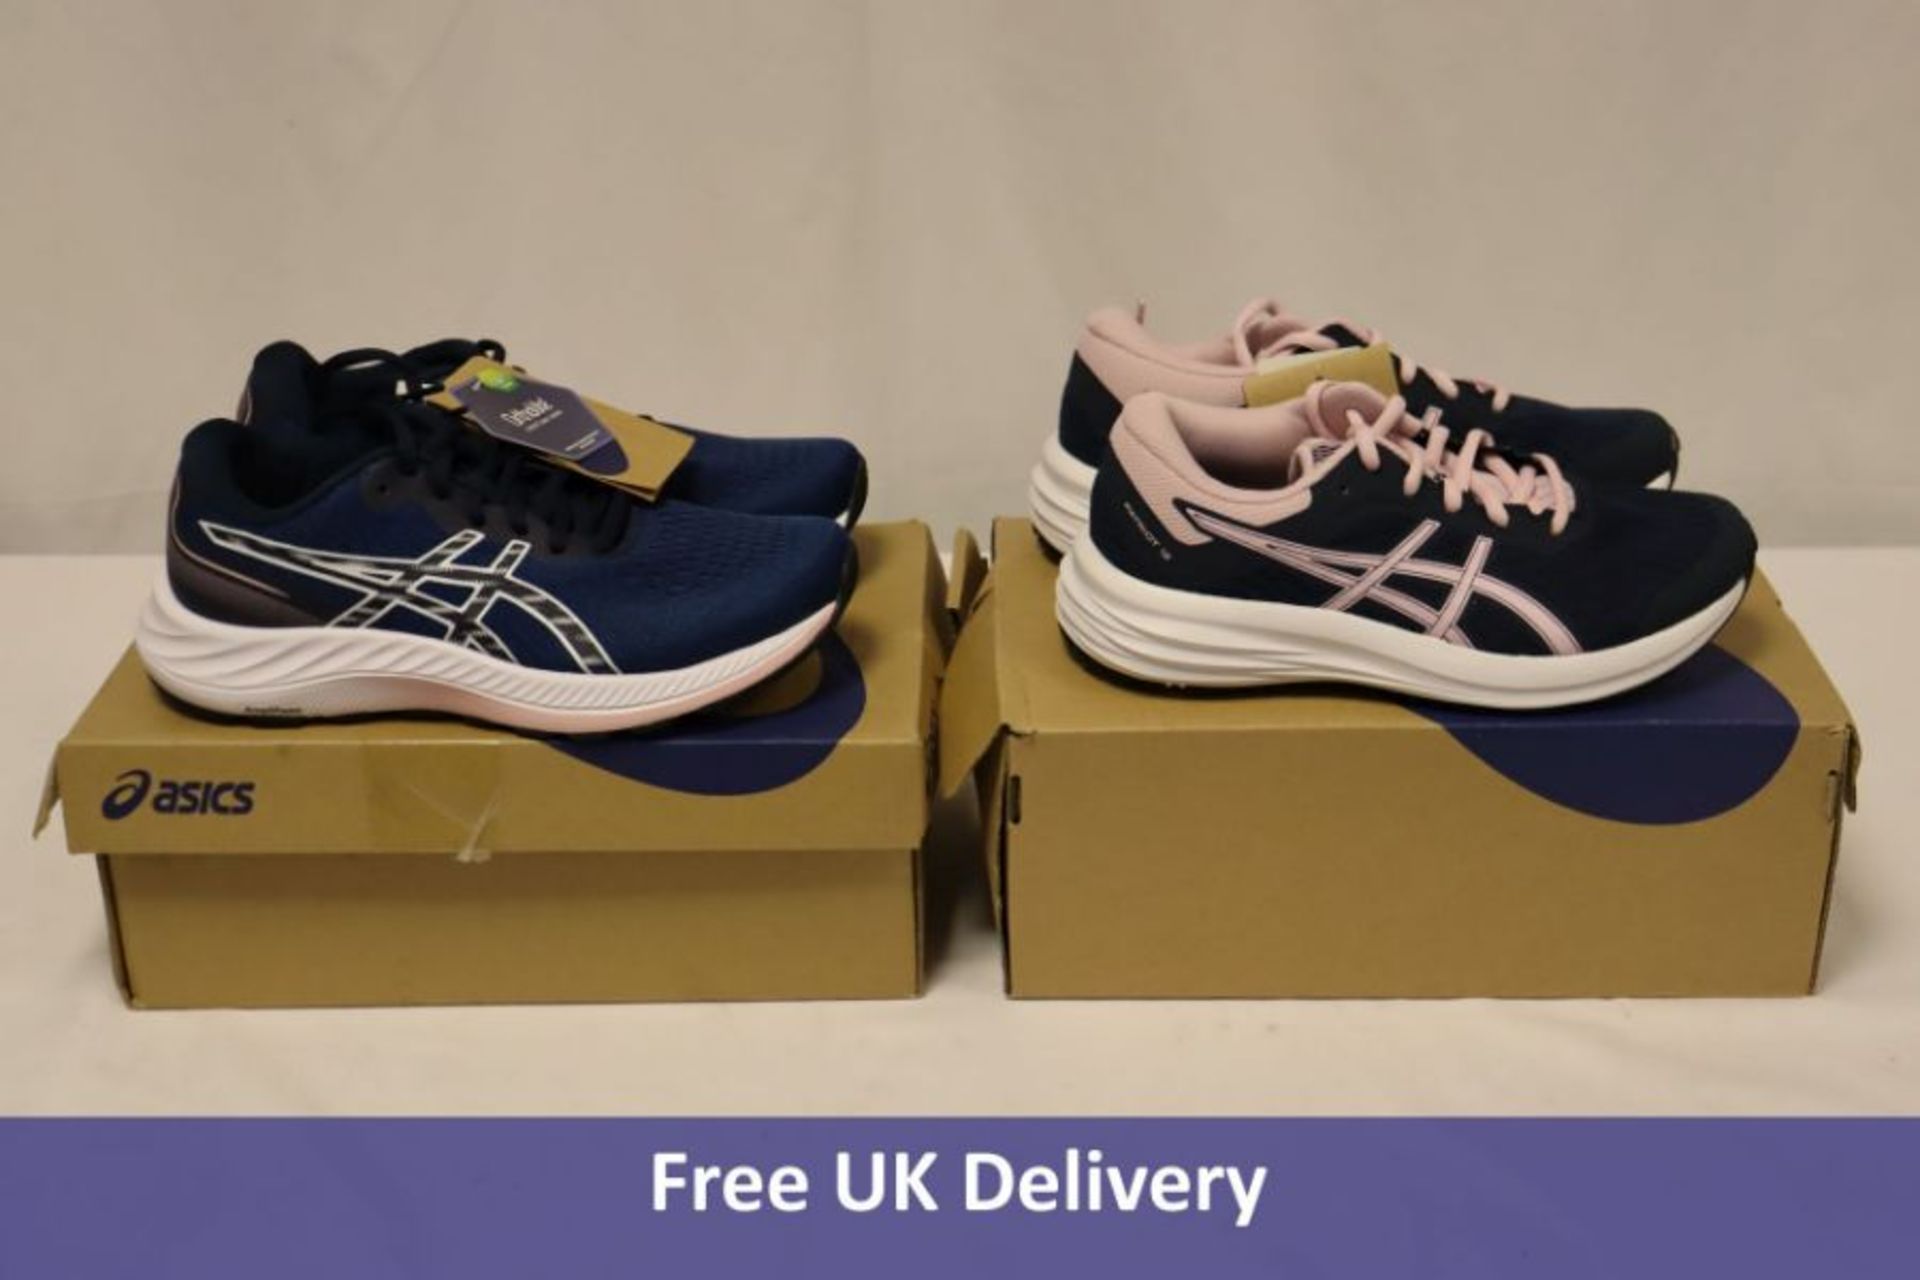 Two Asics items to include 1x Girl's Patriot 12 GS Trainers, French Blue/Barely Rose, UK 2, 1x Women